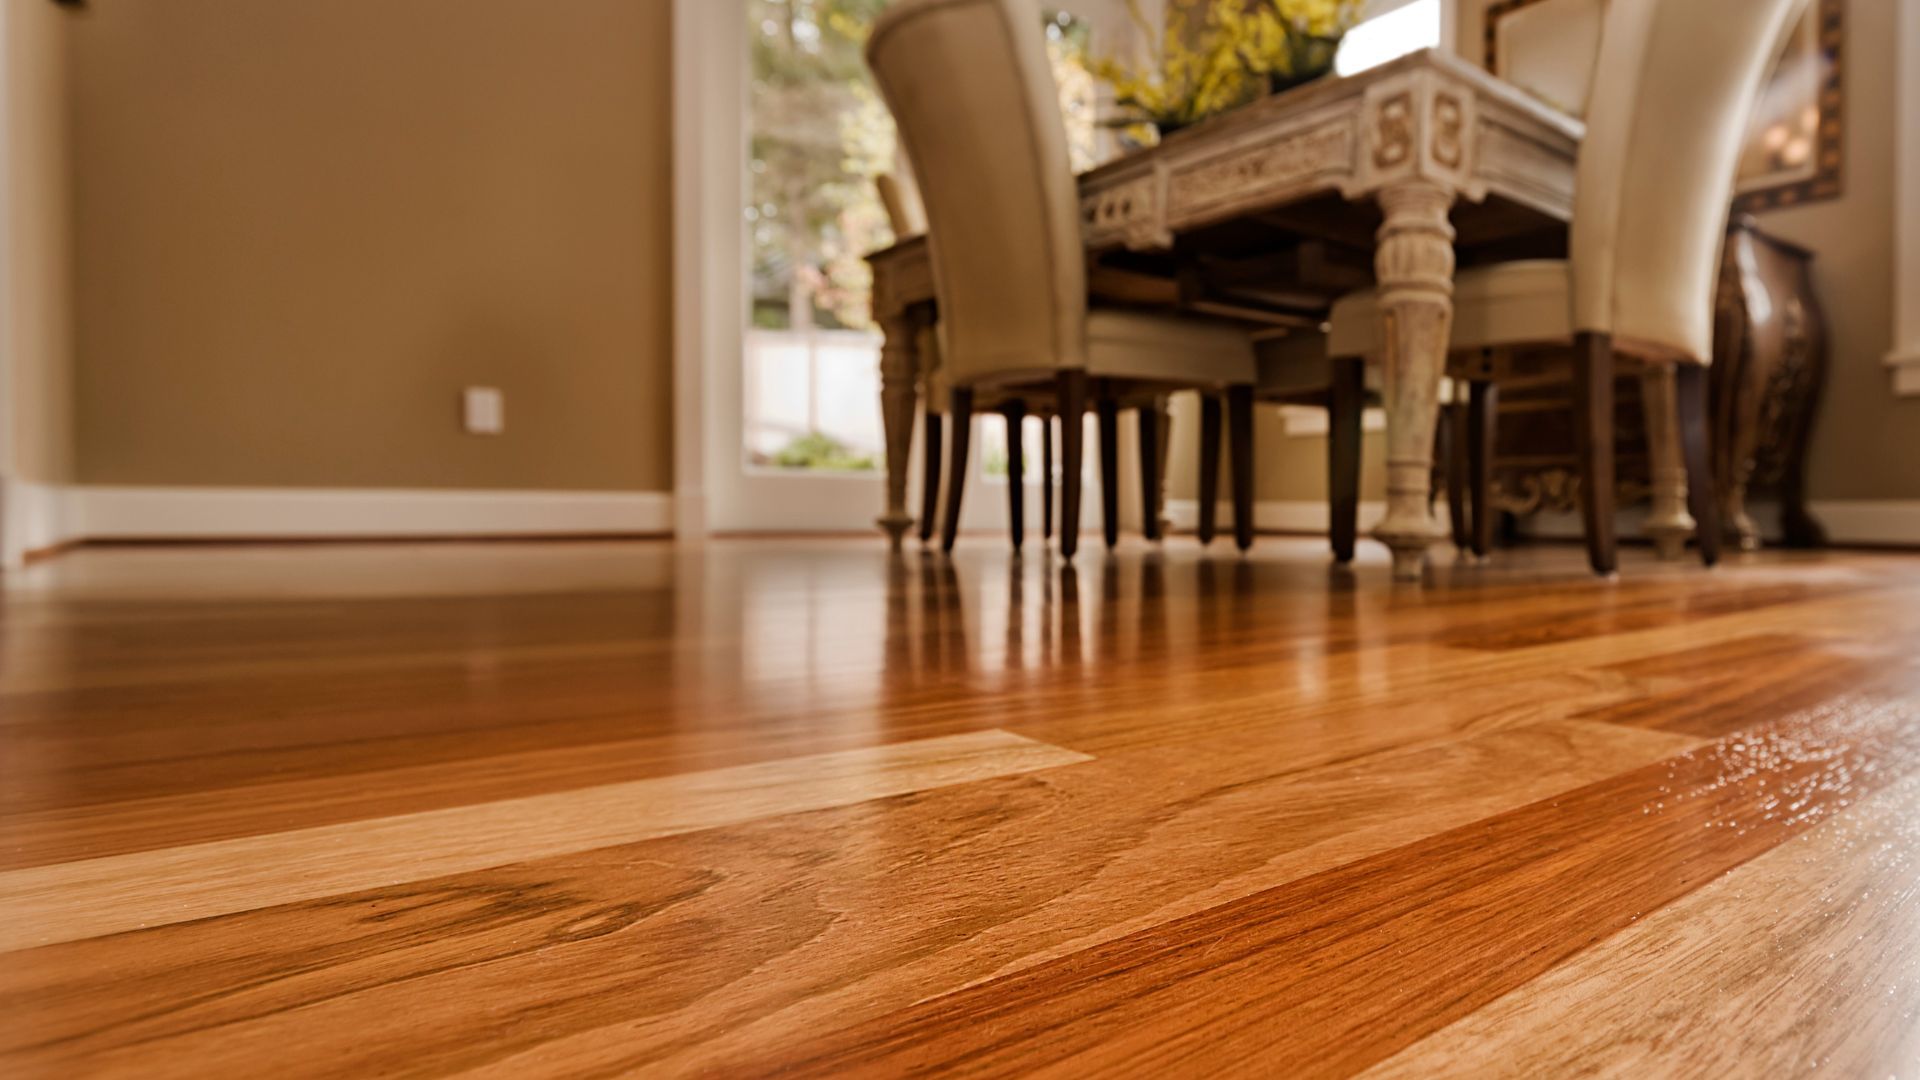 Gleaming hardwood floor with a hint of an elegant dining set.